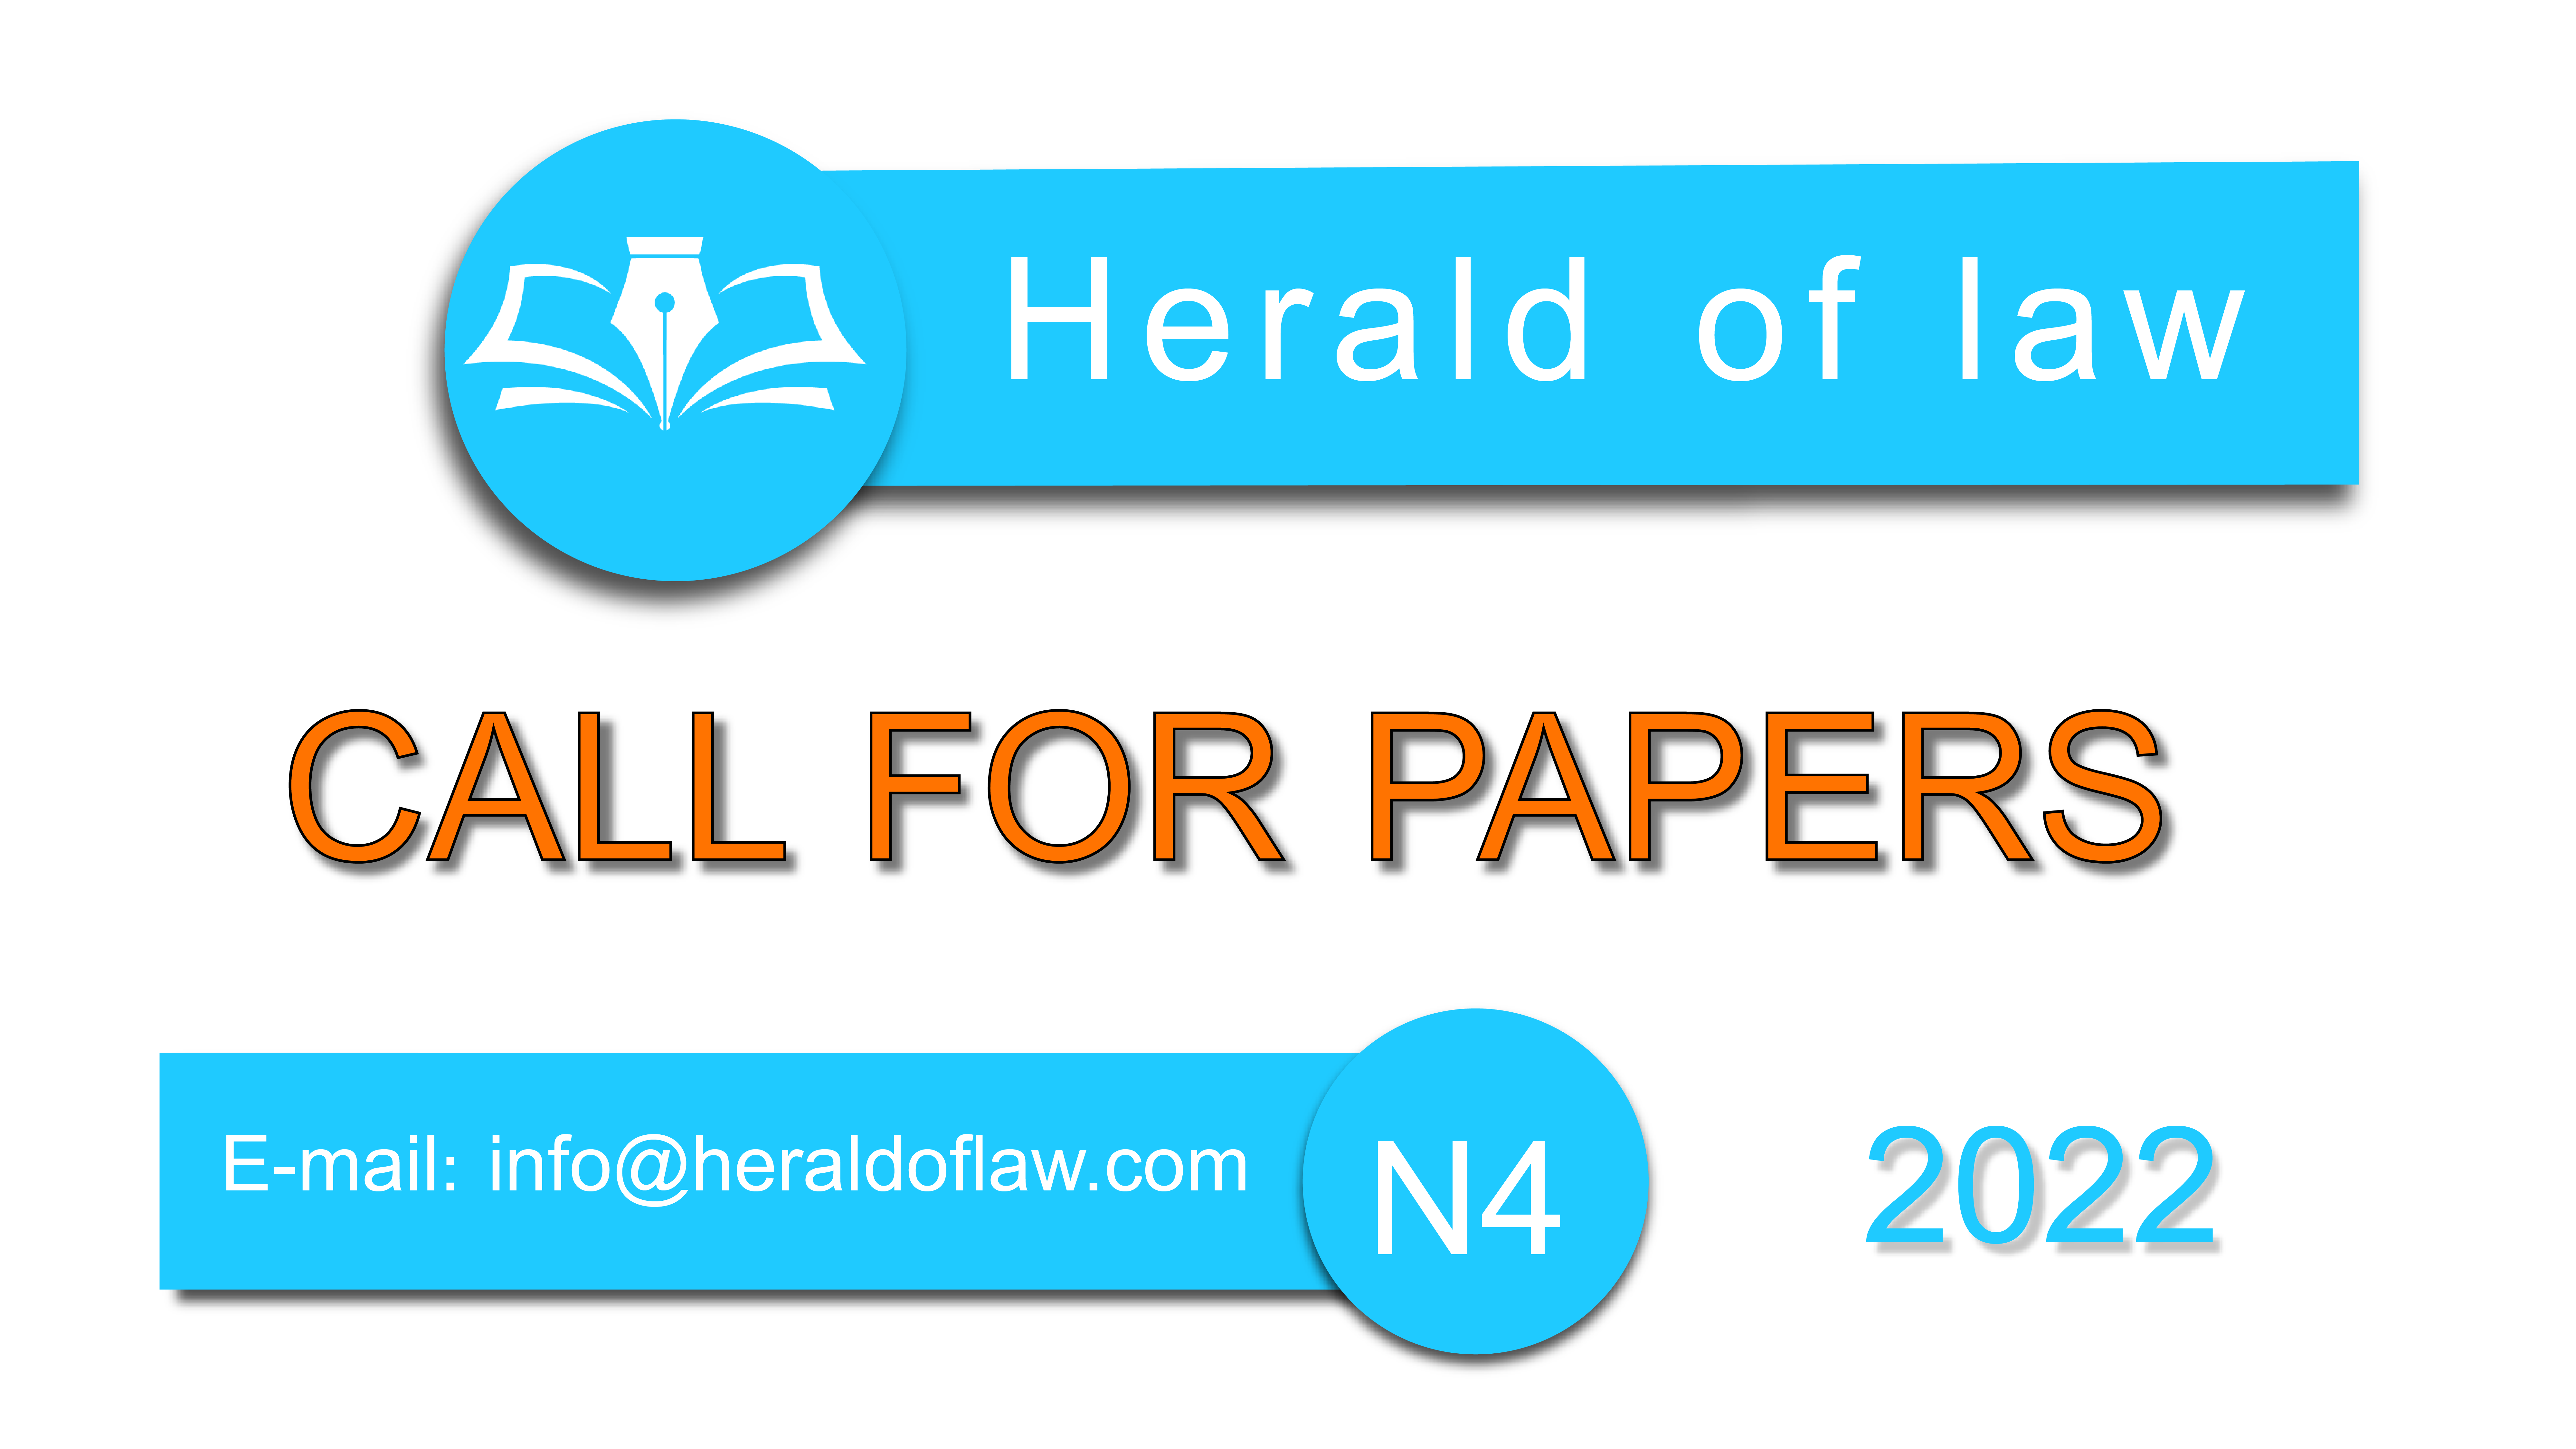 International Scientific Journal ” Herald of Law” Announces Article Competition for the 5th  (July) Issue of the Journal